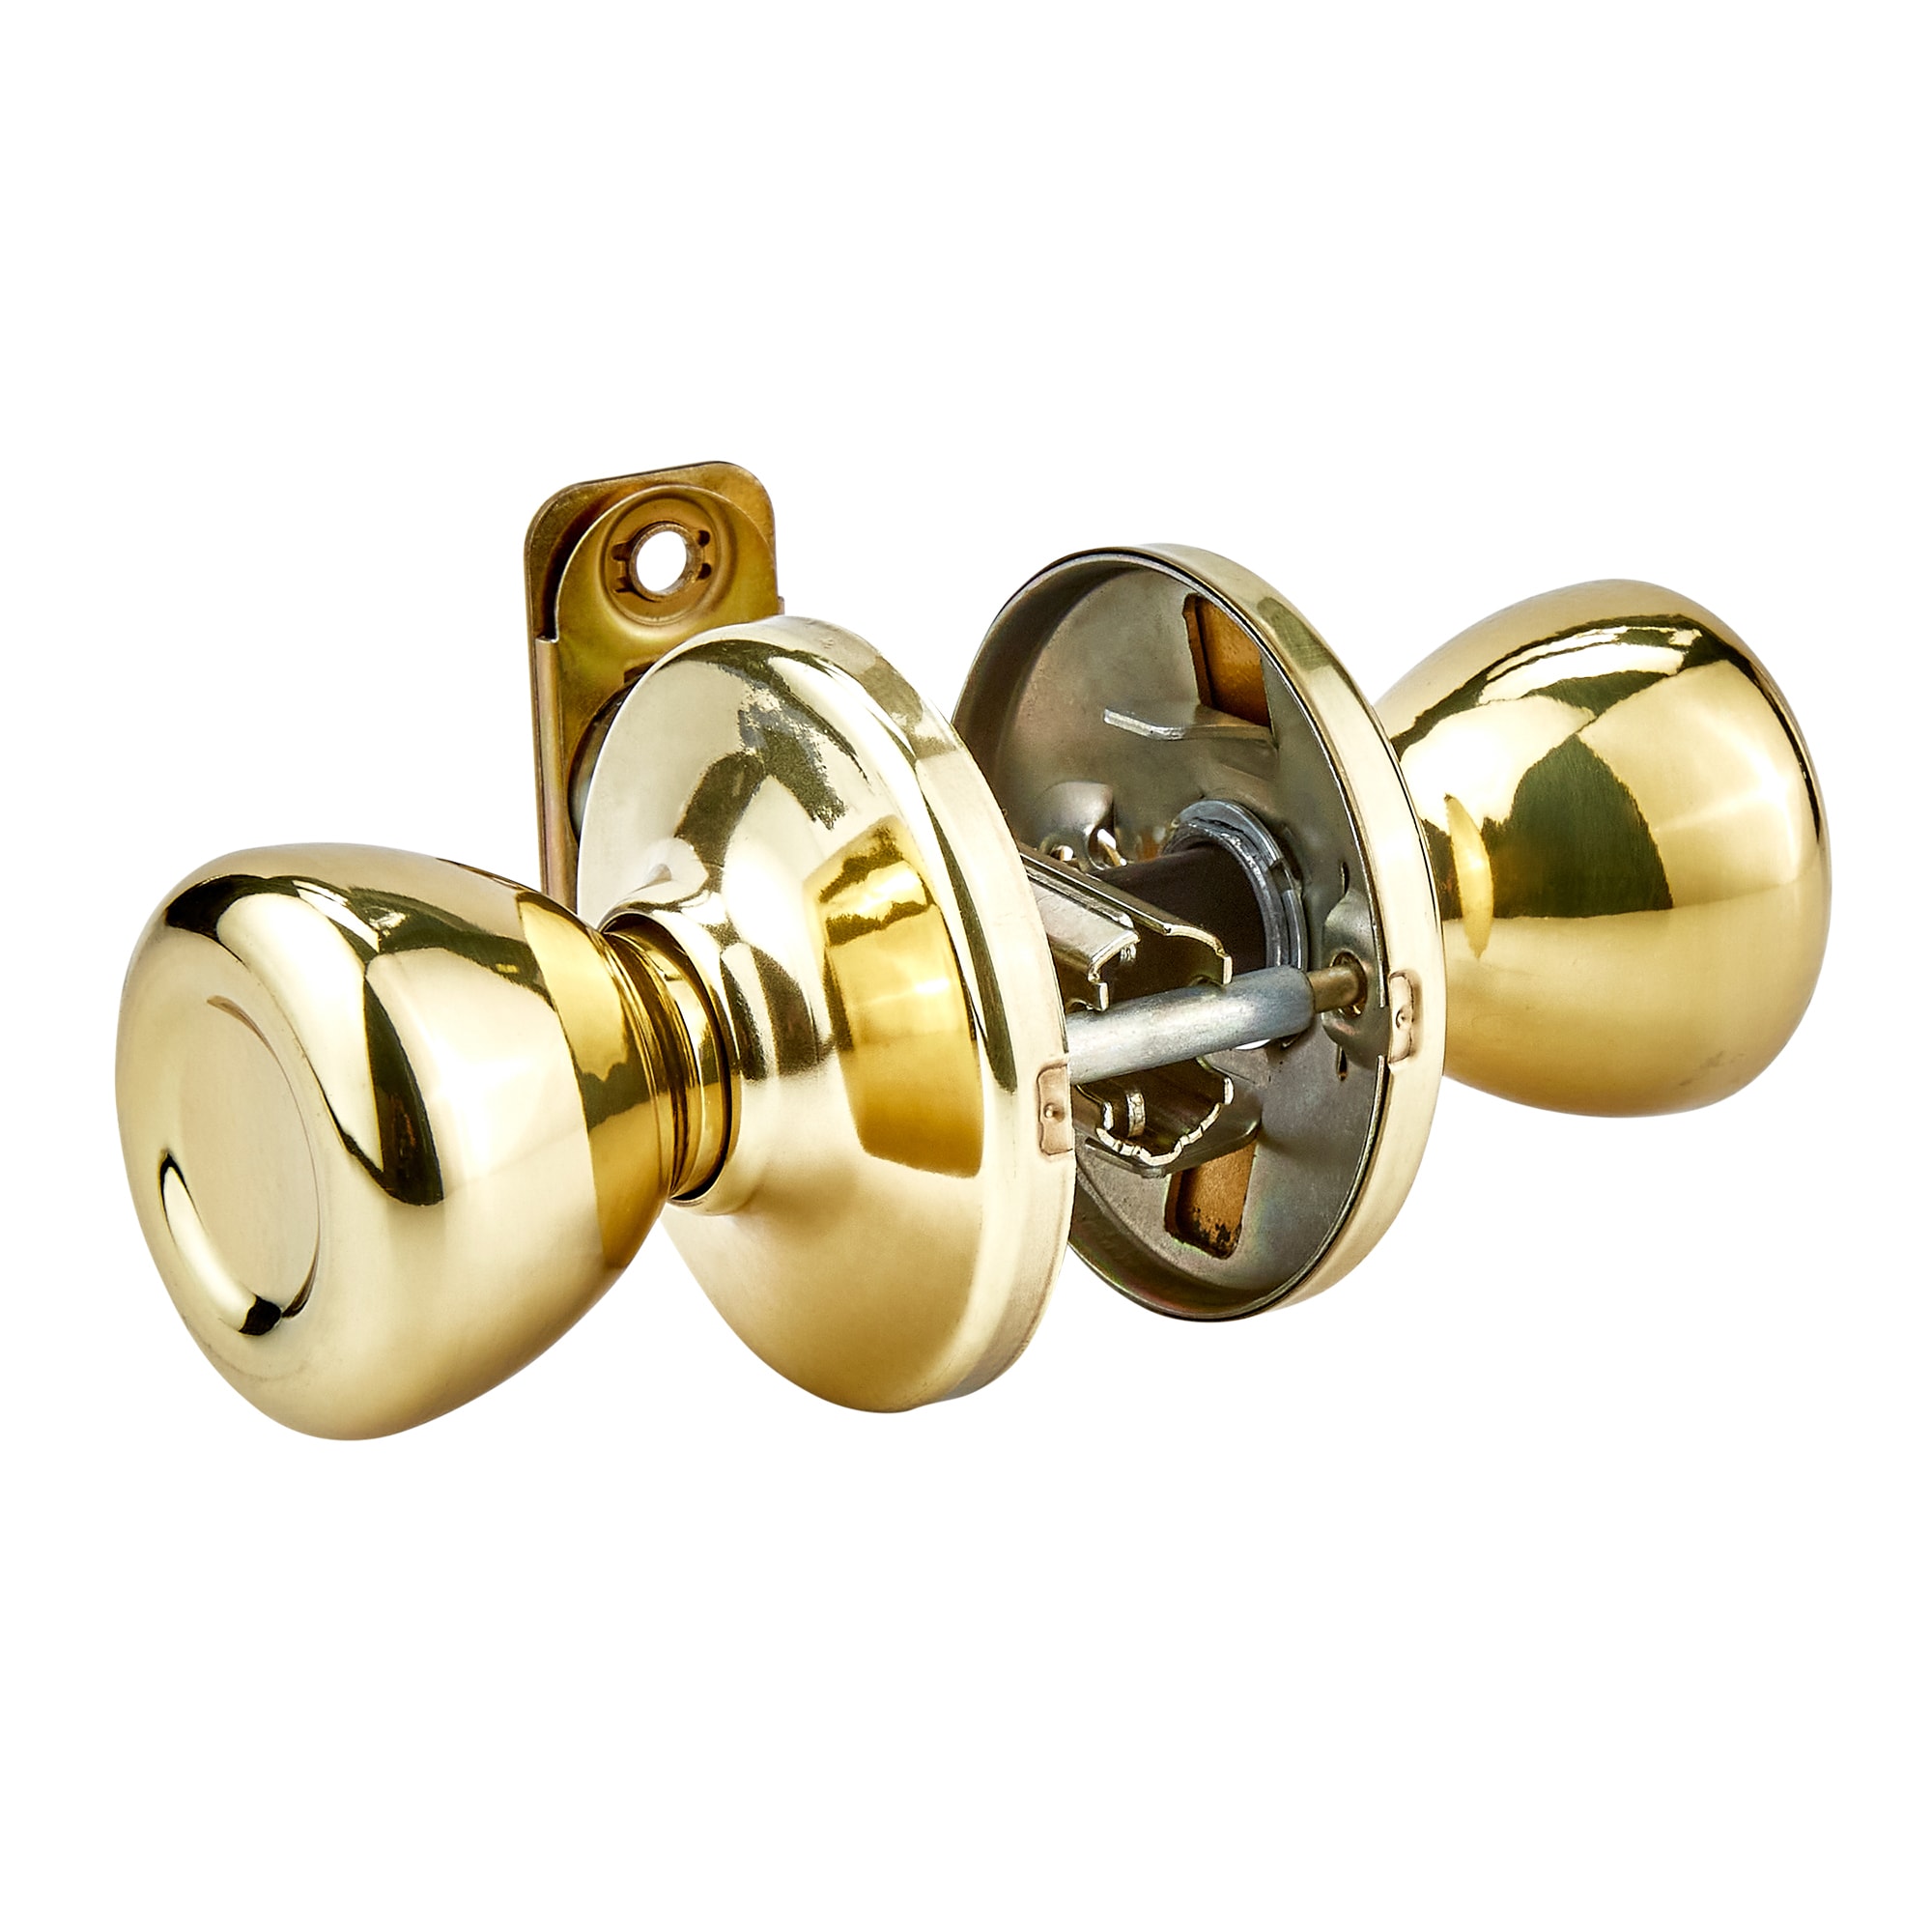 Kwikset Polished Brass Tylo Privacy Knob 300t 3 CP V1 Fp5 for sale online 